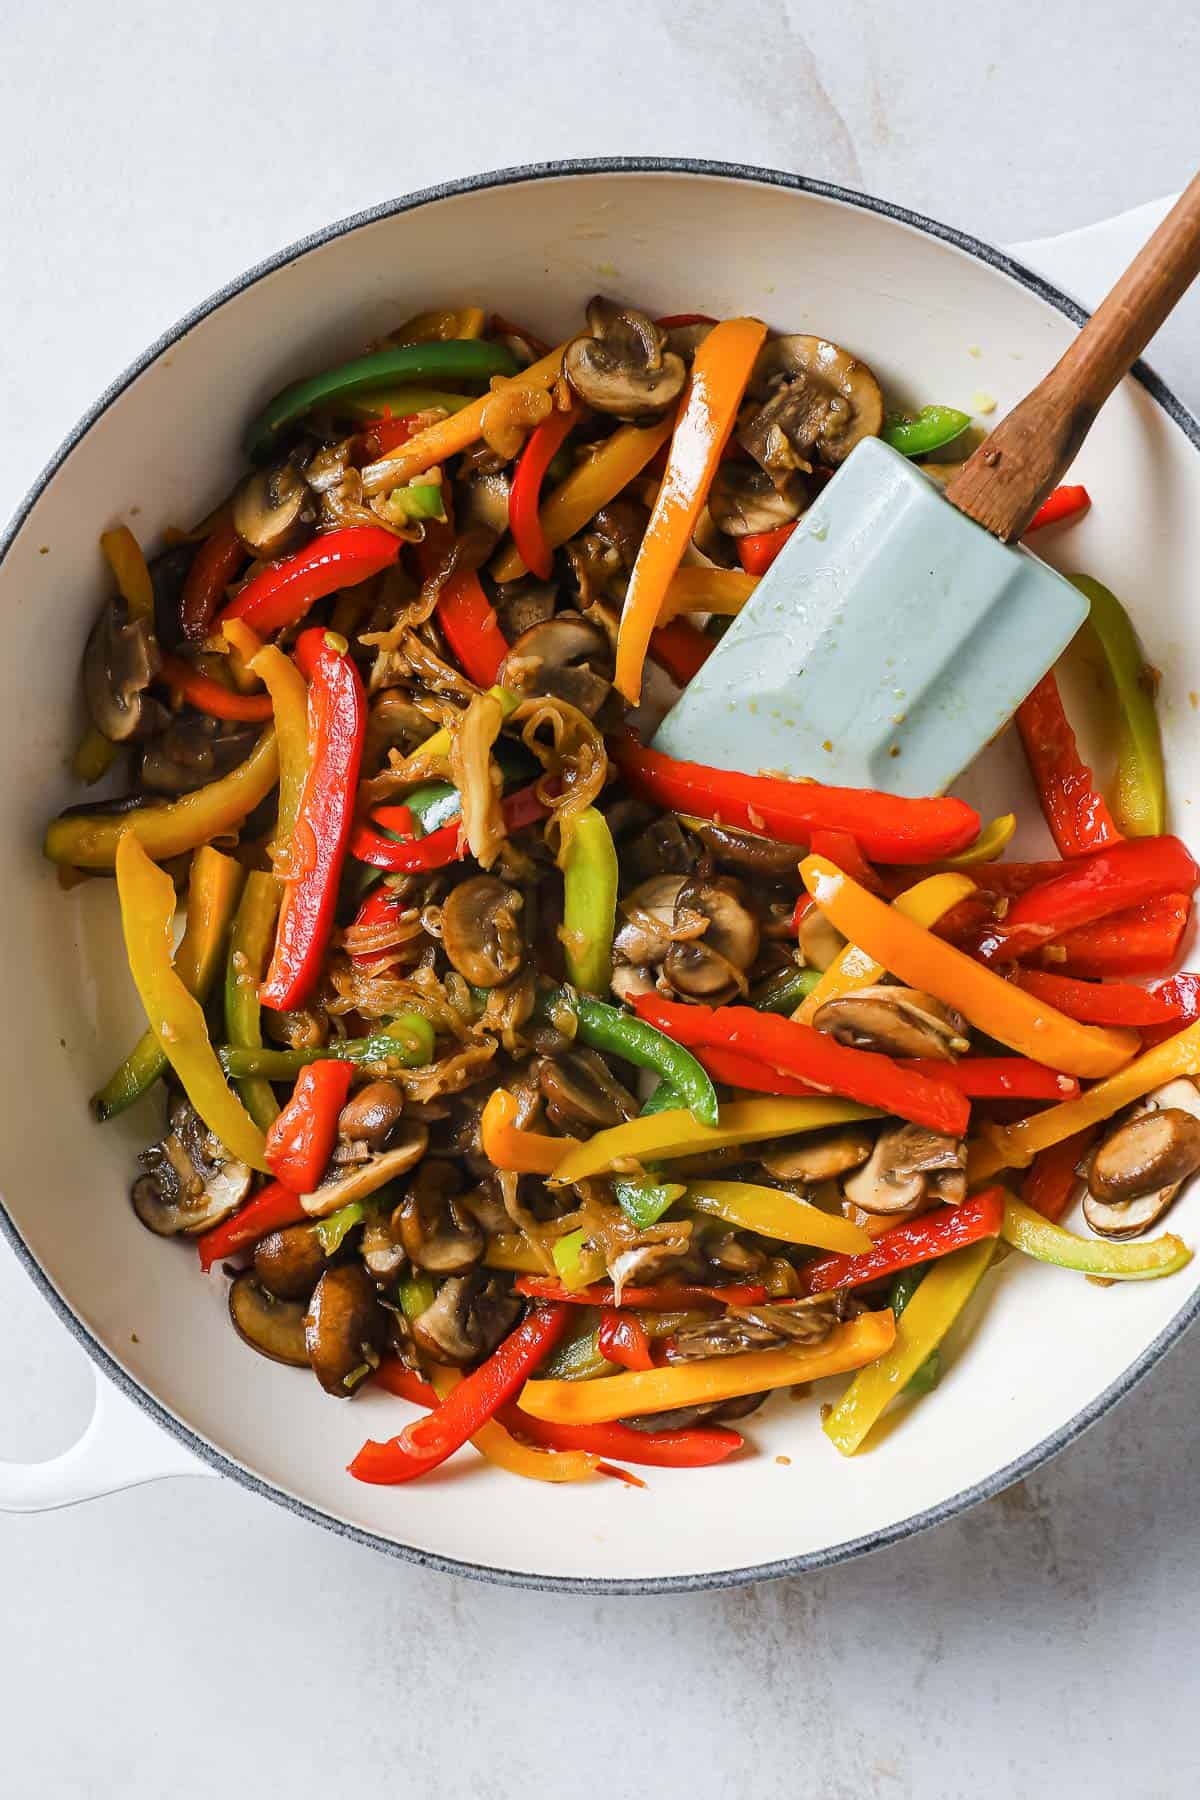 a cast iron skillet with sautéed mushrooms, garlic, peppers, and onions being cooked with a rubber spatula.